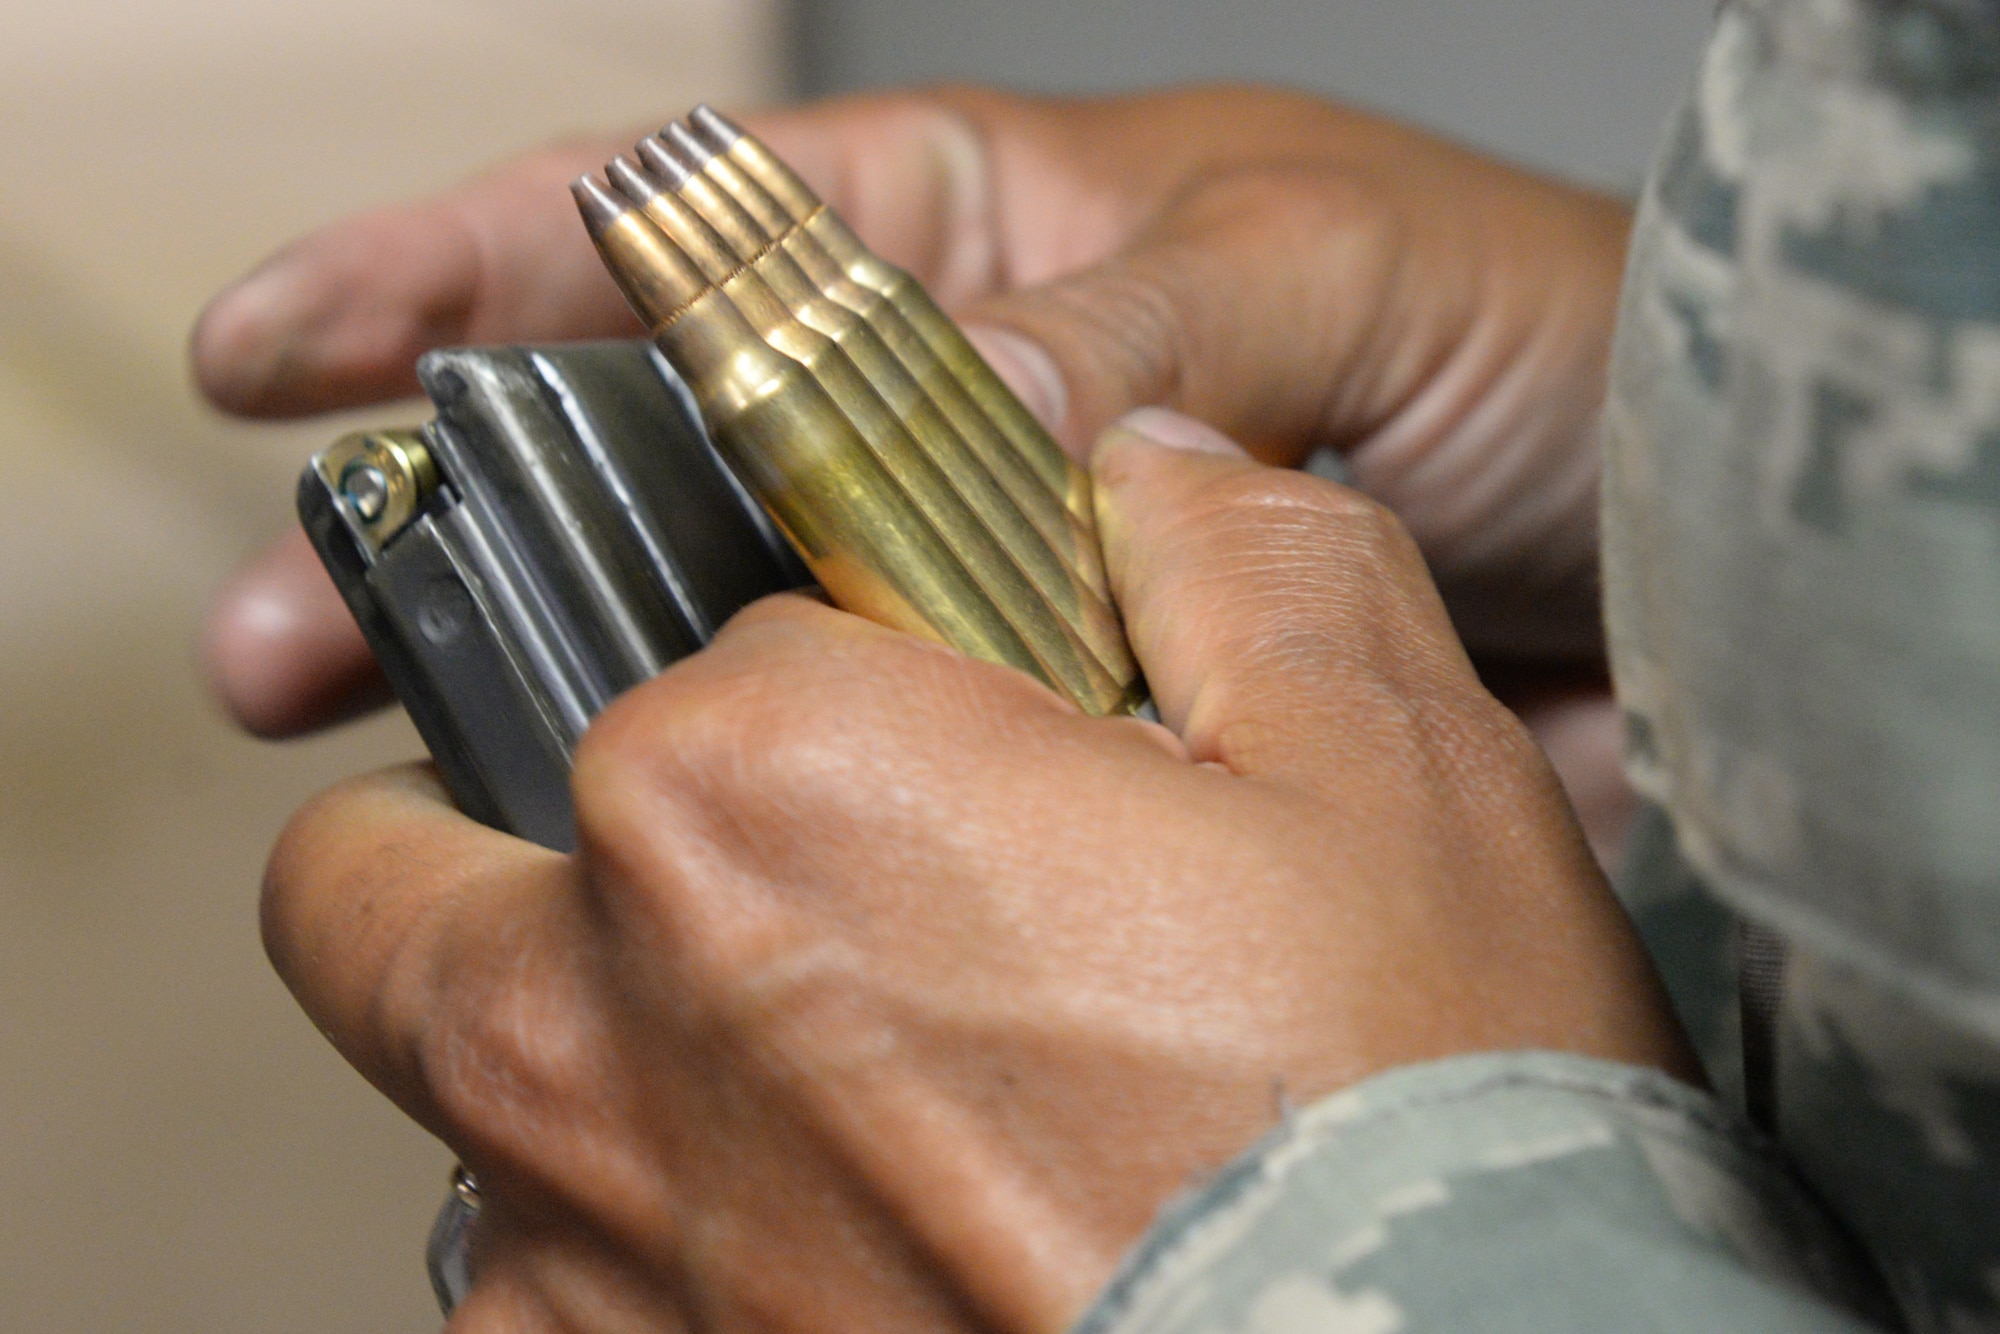 Master Sgt. Leslie Finley, 81st Logistics Readiness Squadron first sergeant, reloads 5.56 mm rounds into his magazine at the Combat Arms Training and Maintenance building March 9, 2016, Keesler Air Force Base, Miss. Before being deployed, Airmen must pass weapons qualifications with the M4 Carbine and be able to shoot from four positions – prone supported, prone unsupported, kneeling supported and over barricade supported – and hit their target from as far as 300 meters away. (U.S. Air Force photo by Airman 1st Class Travis Beihl)